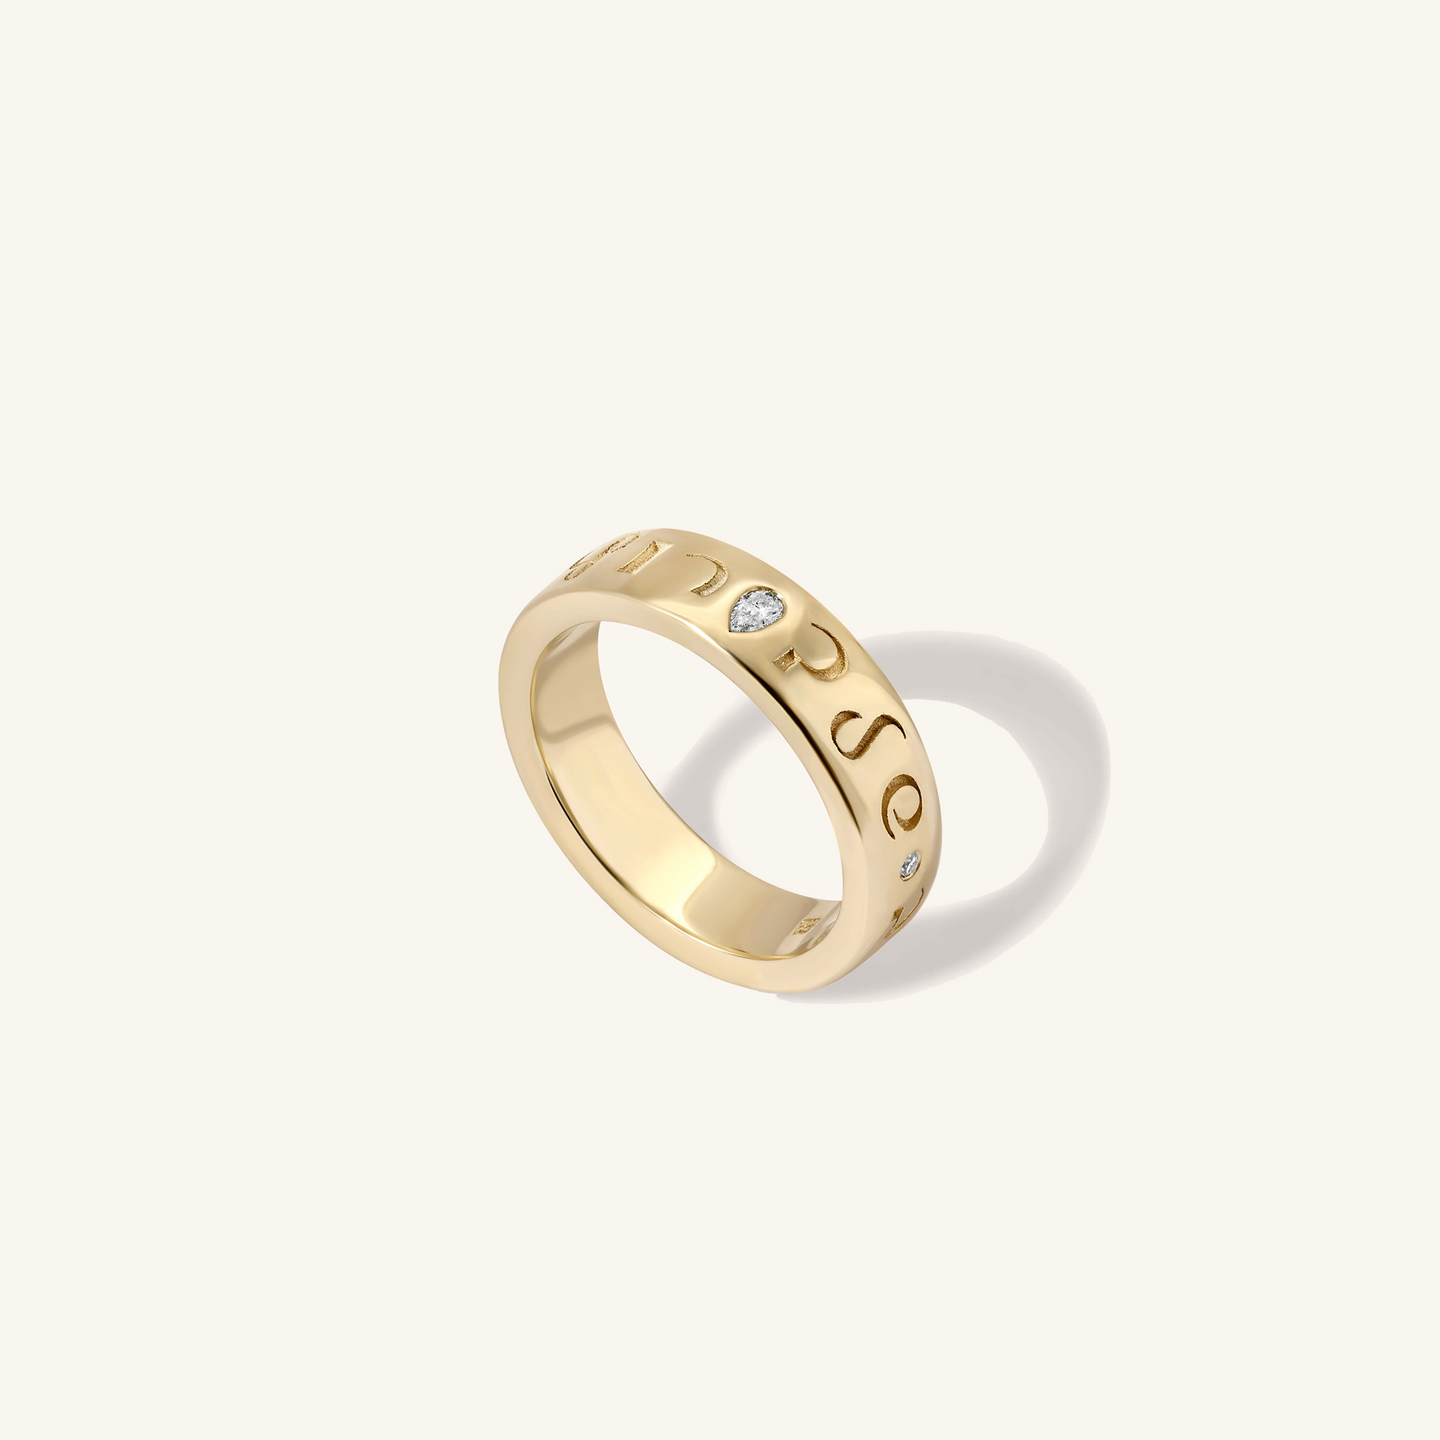 'Your Heart Knows The Way' Cigar Band Ring